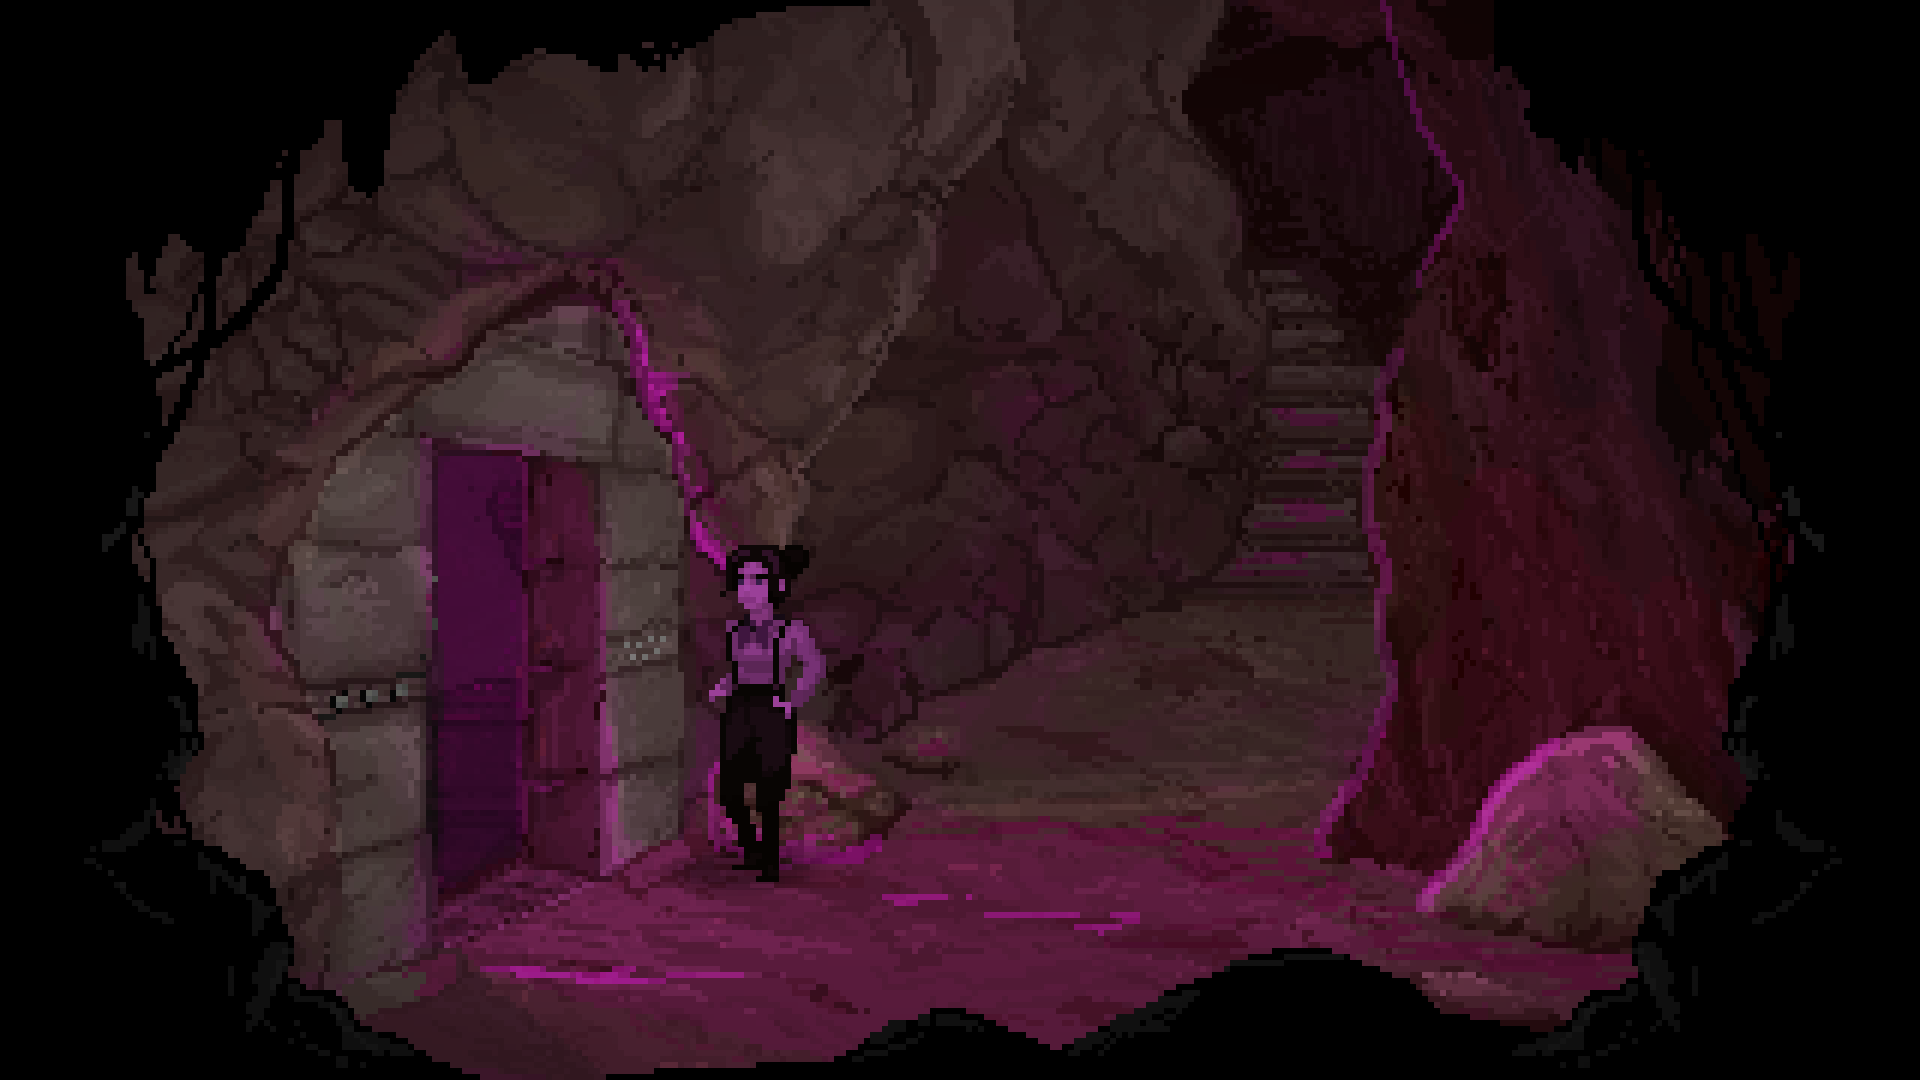 A woman enters an open door in a cave emanating violet light in The Excavation Of Hob's Barrow.